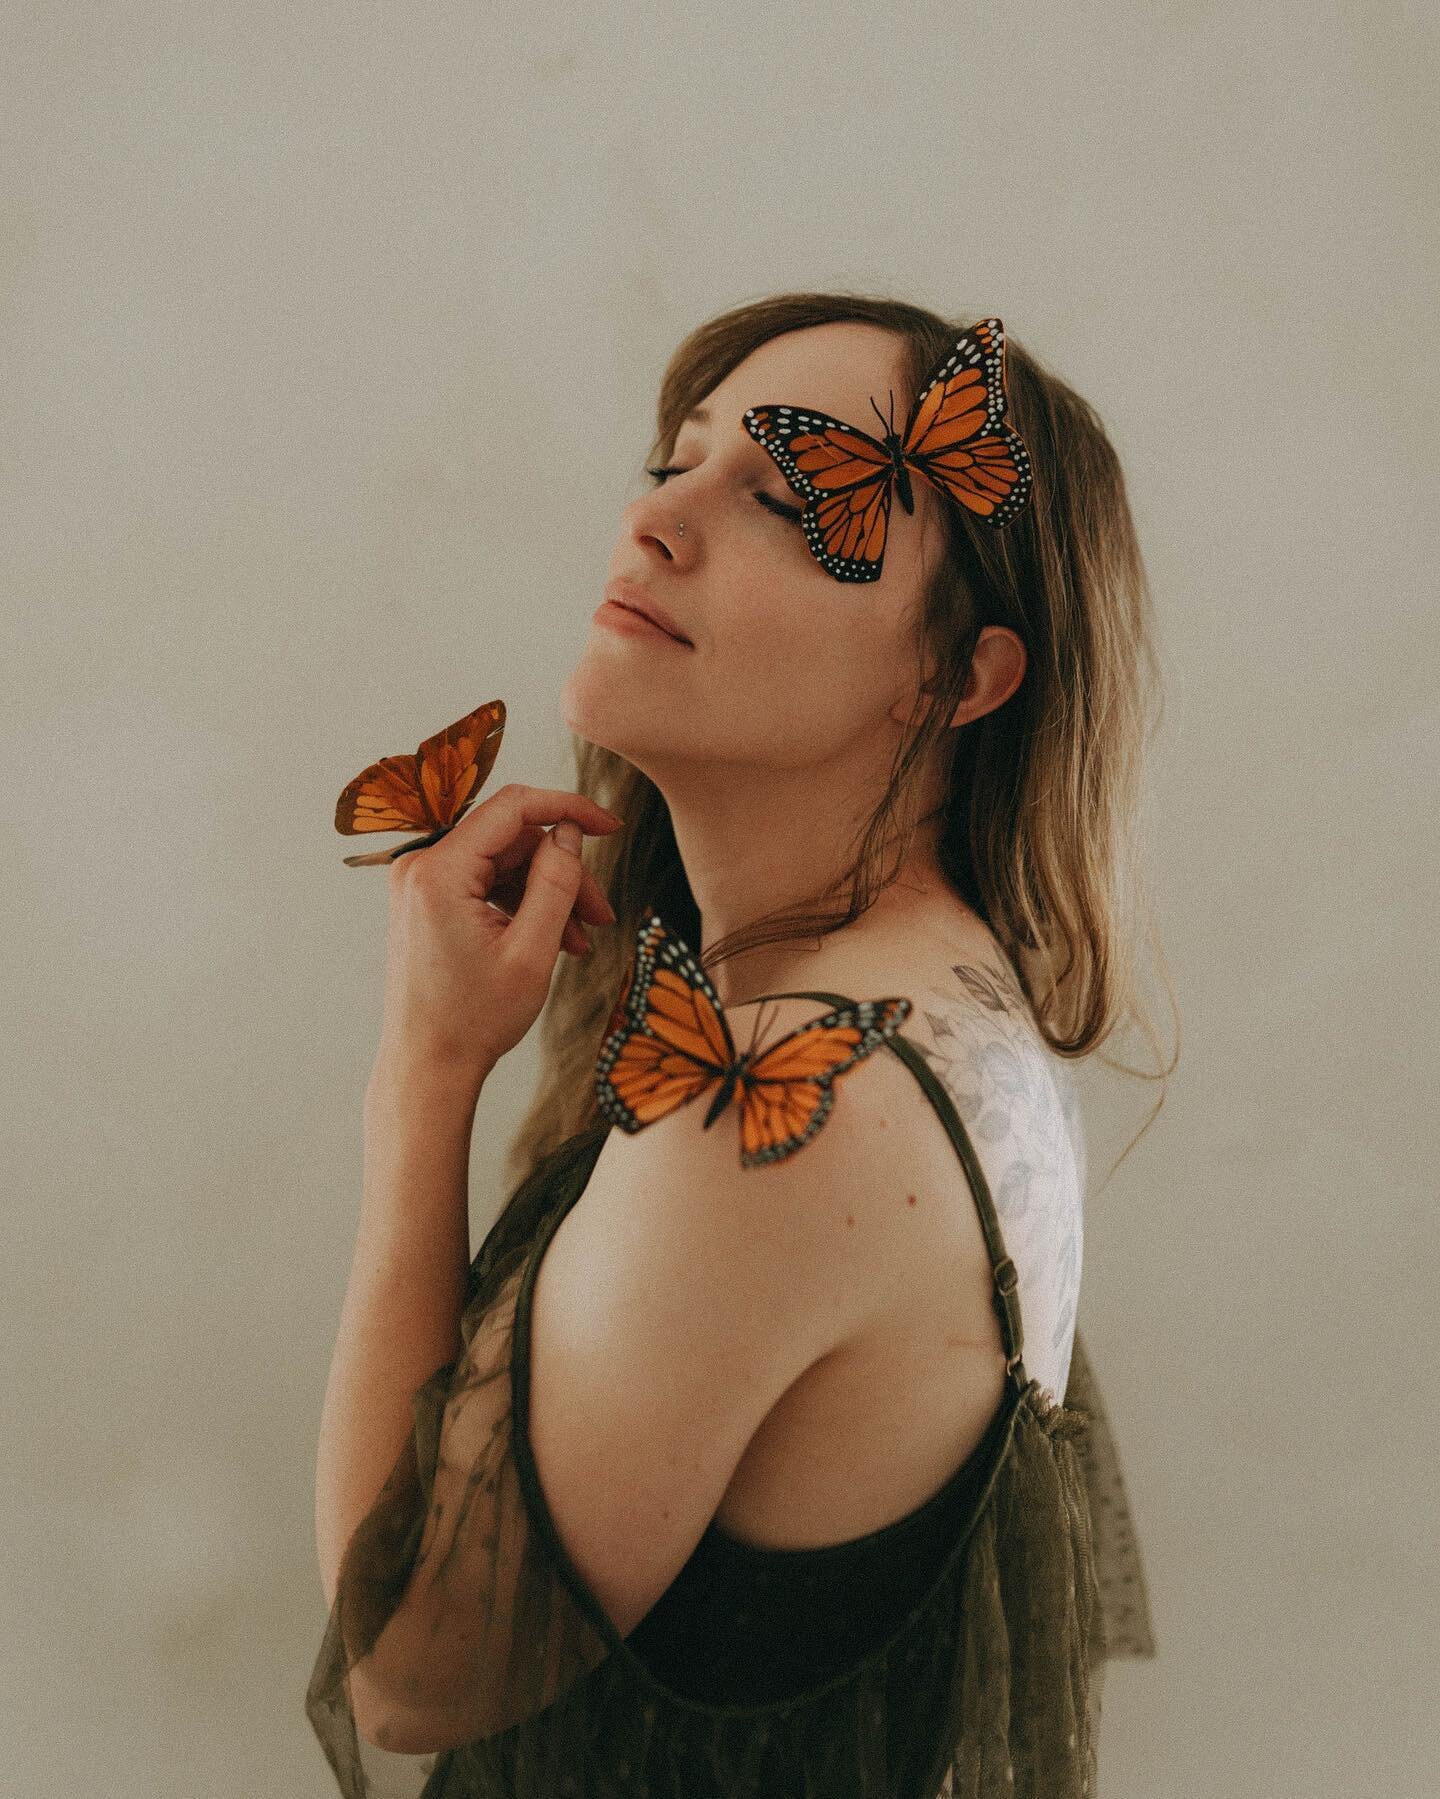 a beautiful series titled, &ldquo;The Butterfly Effect&rdquo; photographed by the talented @fabes.creates 
✨🫶